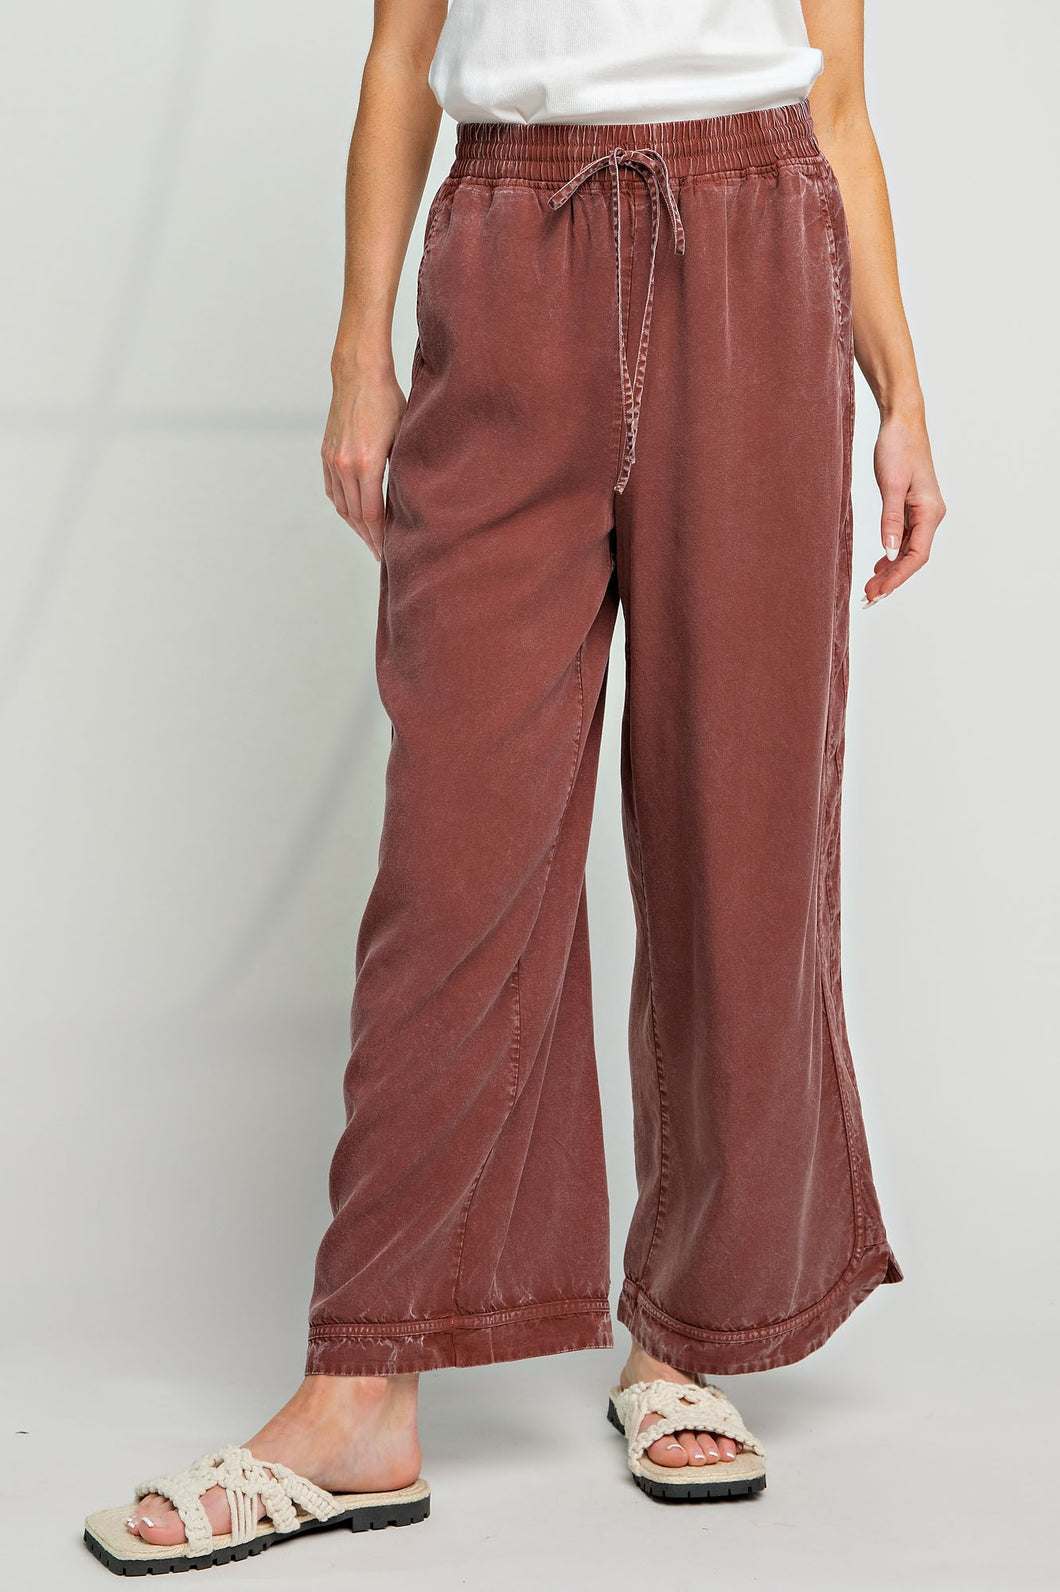 Easel Mineral Washed Wide Leg Pants in Espresso Pants Easel   